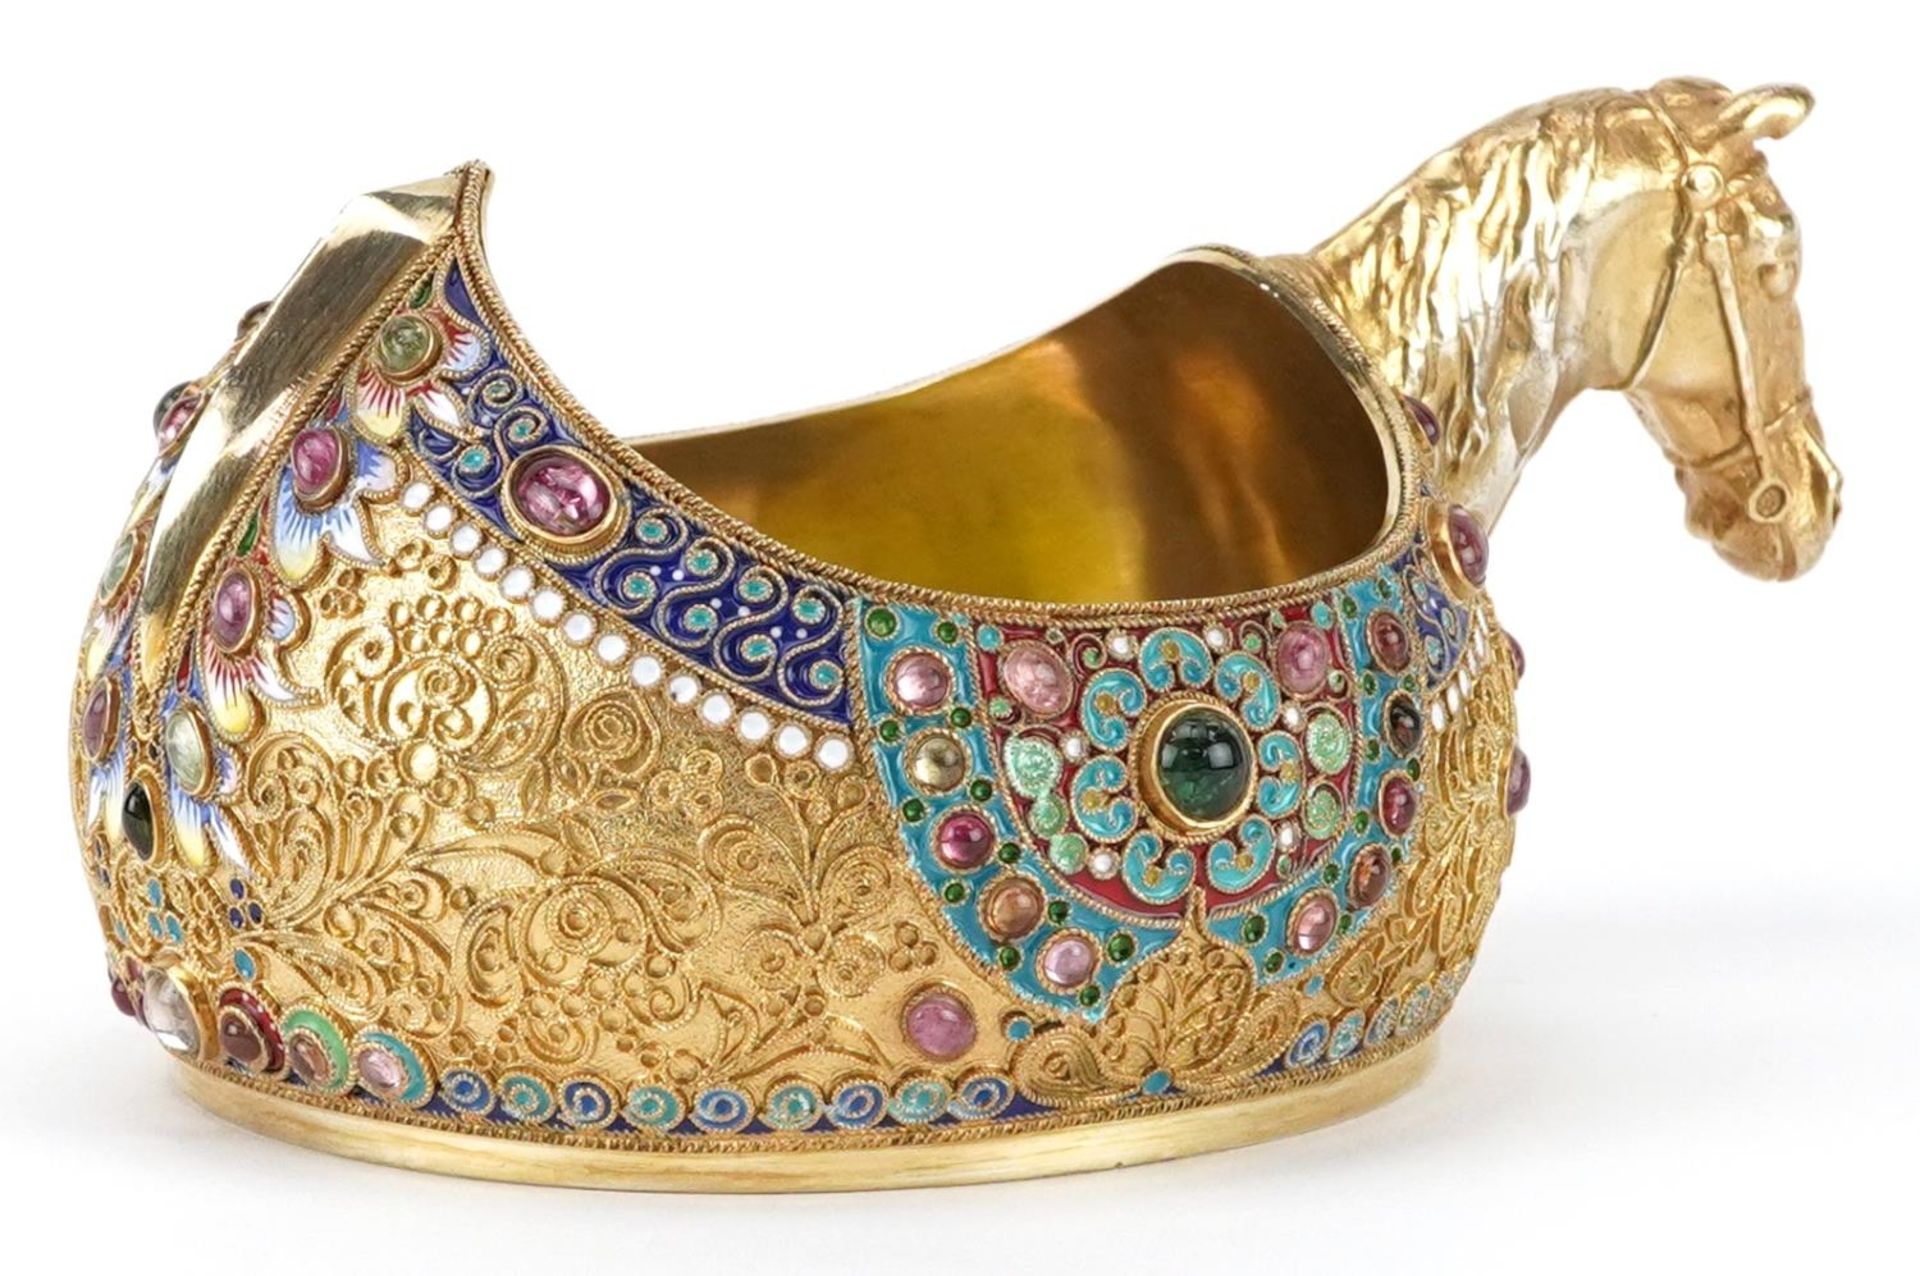 Silver gilt champleve enamel kovsh having a horsehead design handle and set with colourful - Image 3 of 5